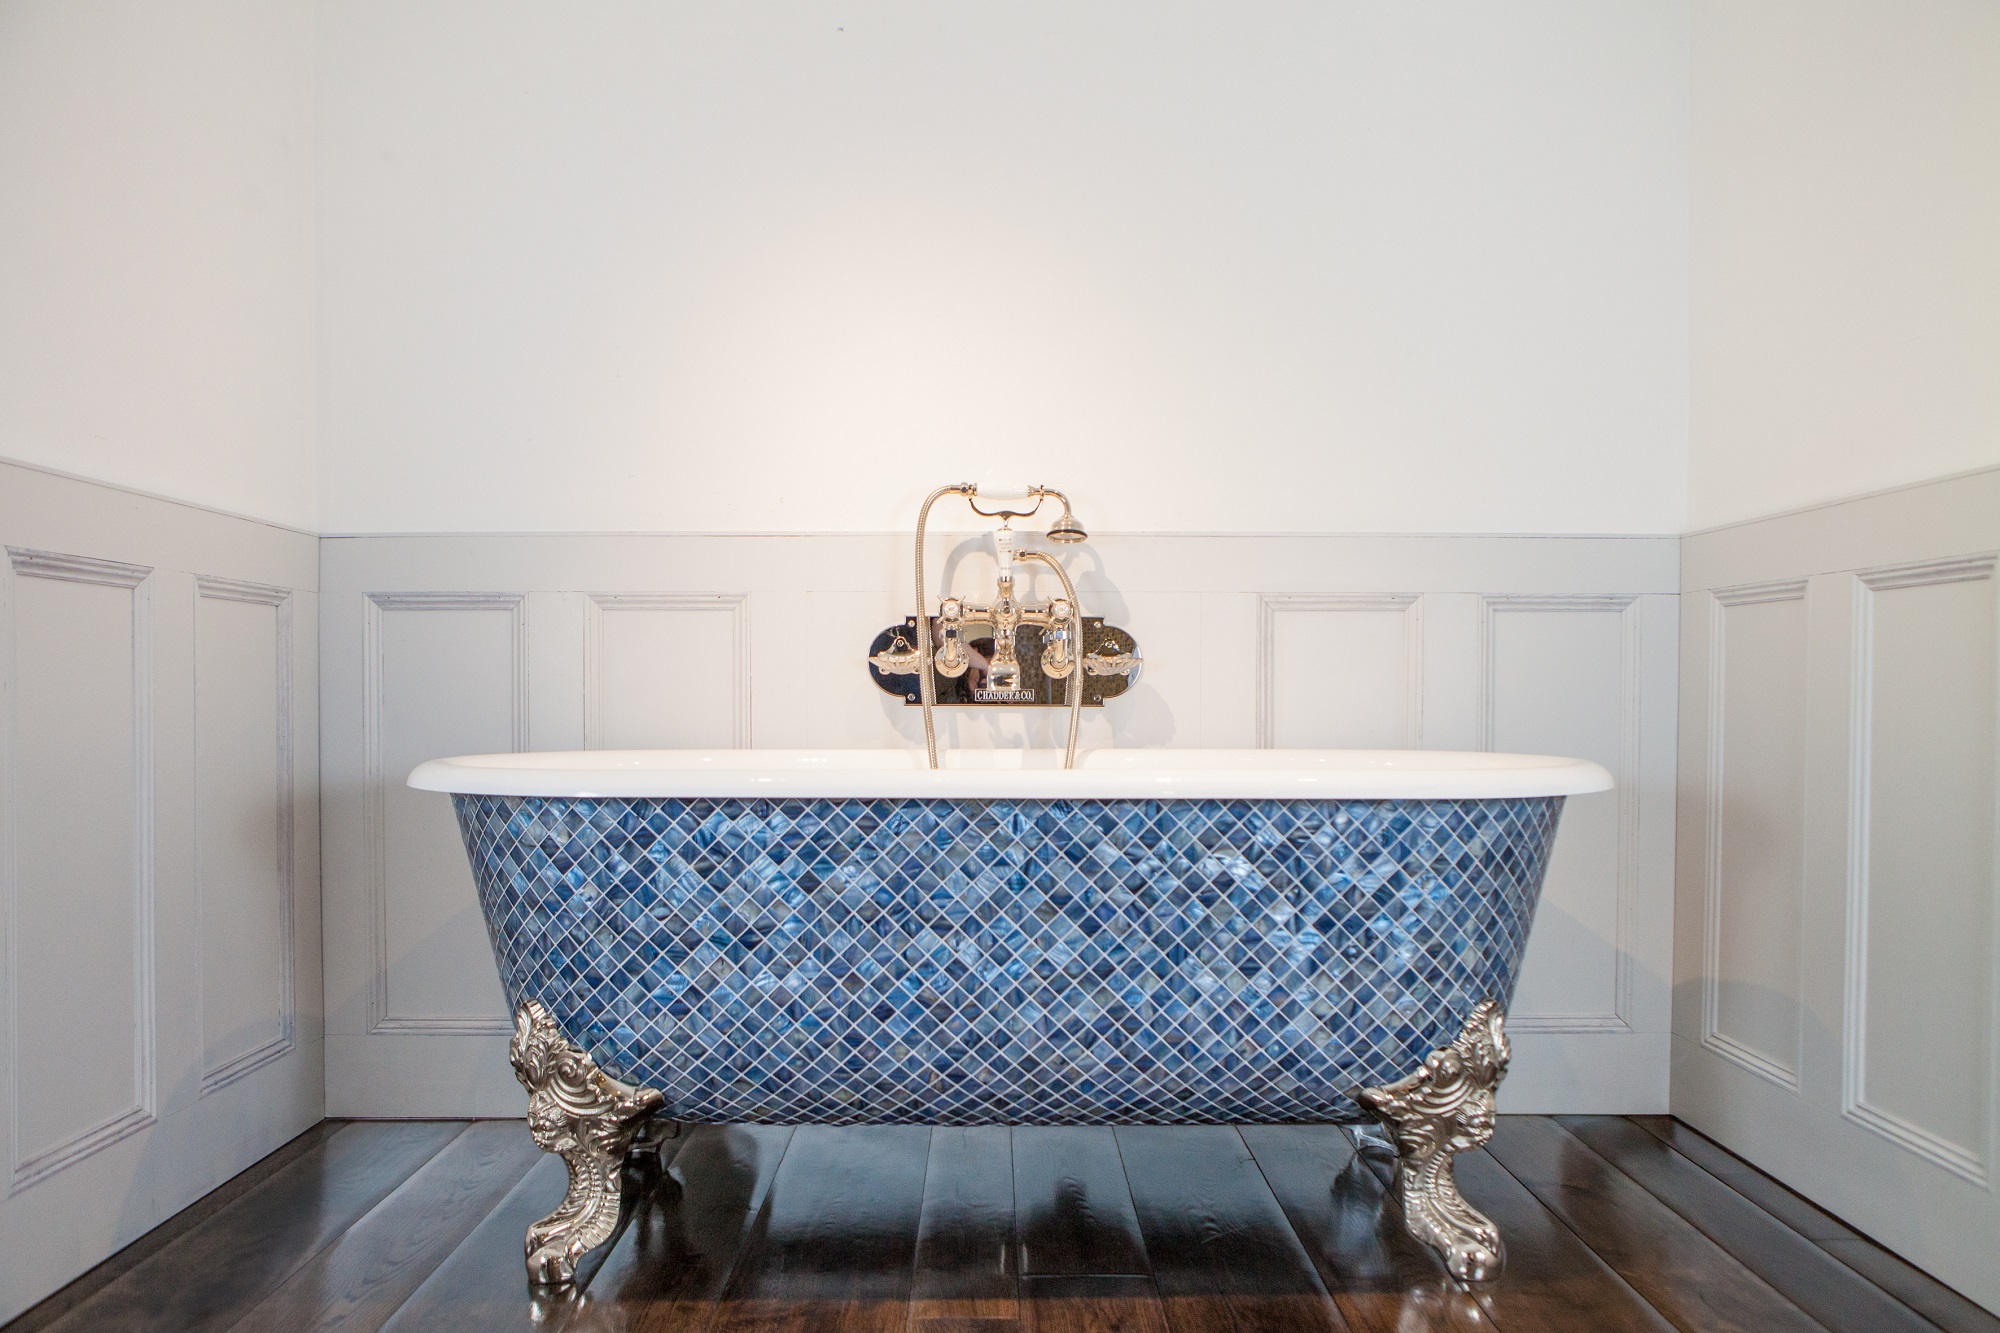 luxury-bath-pearl-bath-mother-of-pearl-mosaic-blue-pearl-chadder-and-co-double-ended-bath-free-standing-tub-taps-faucet-nickel-brass-4